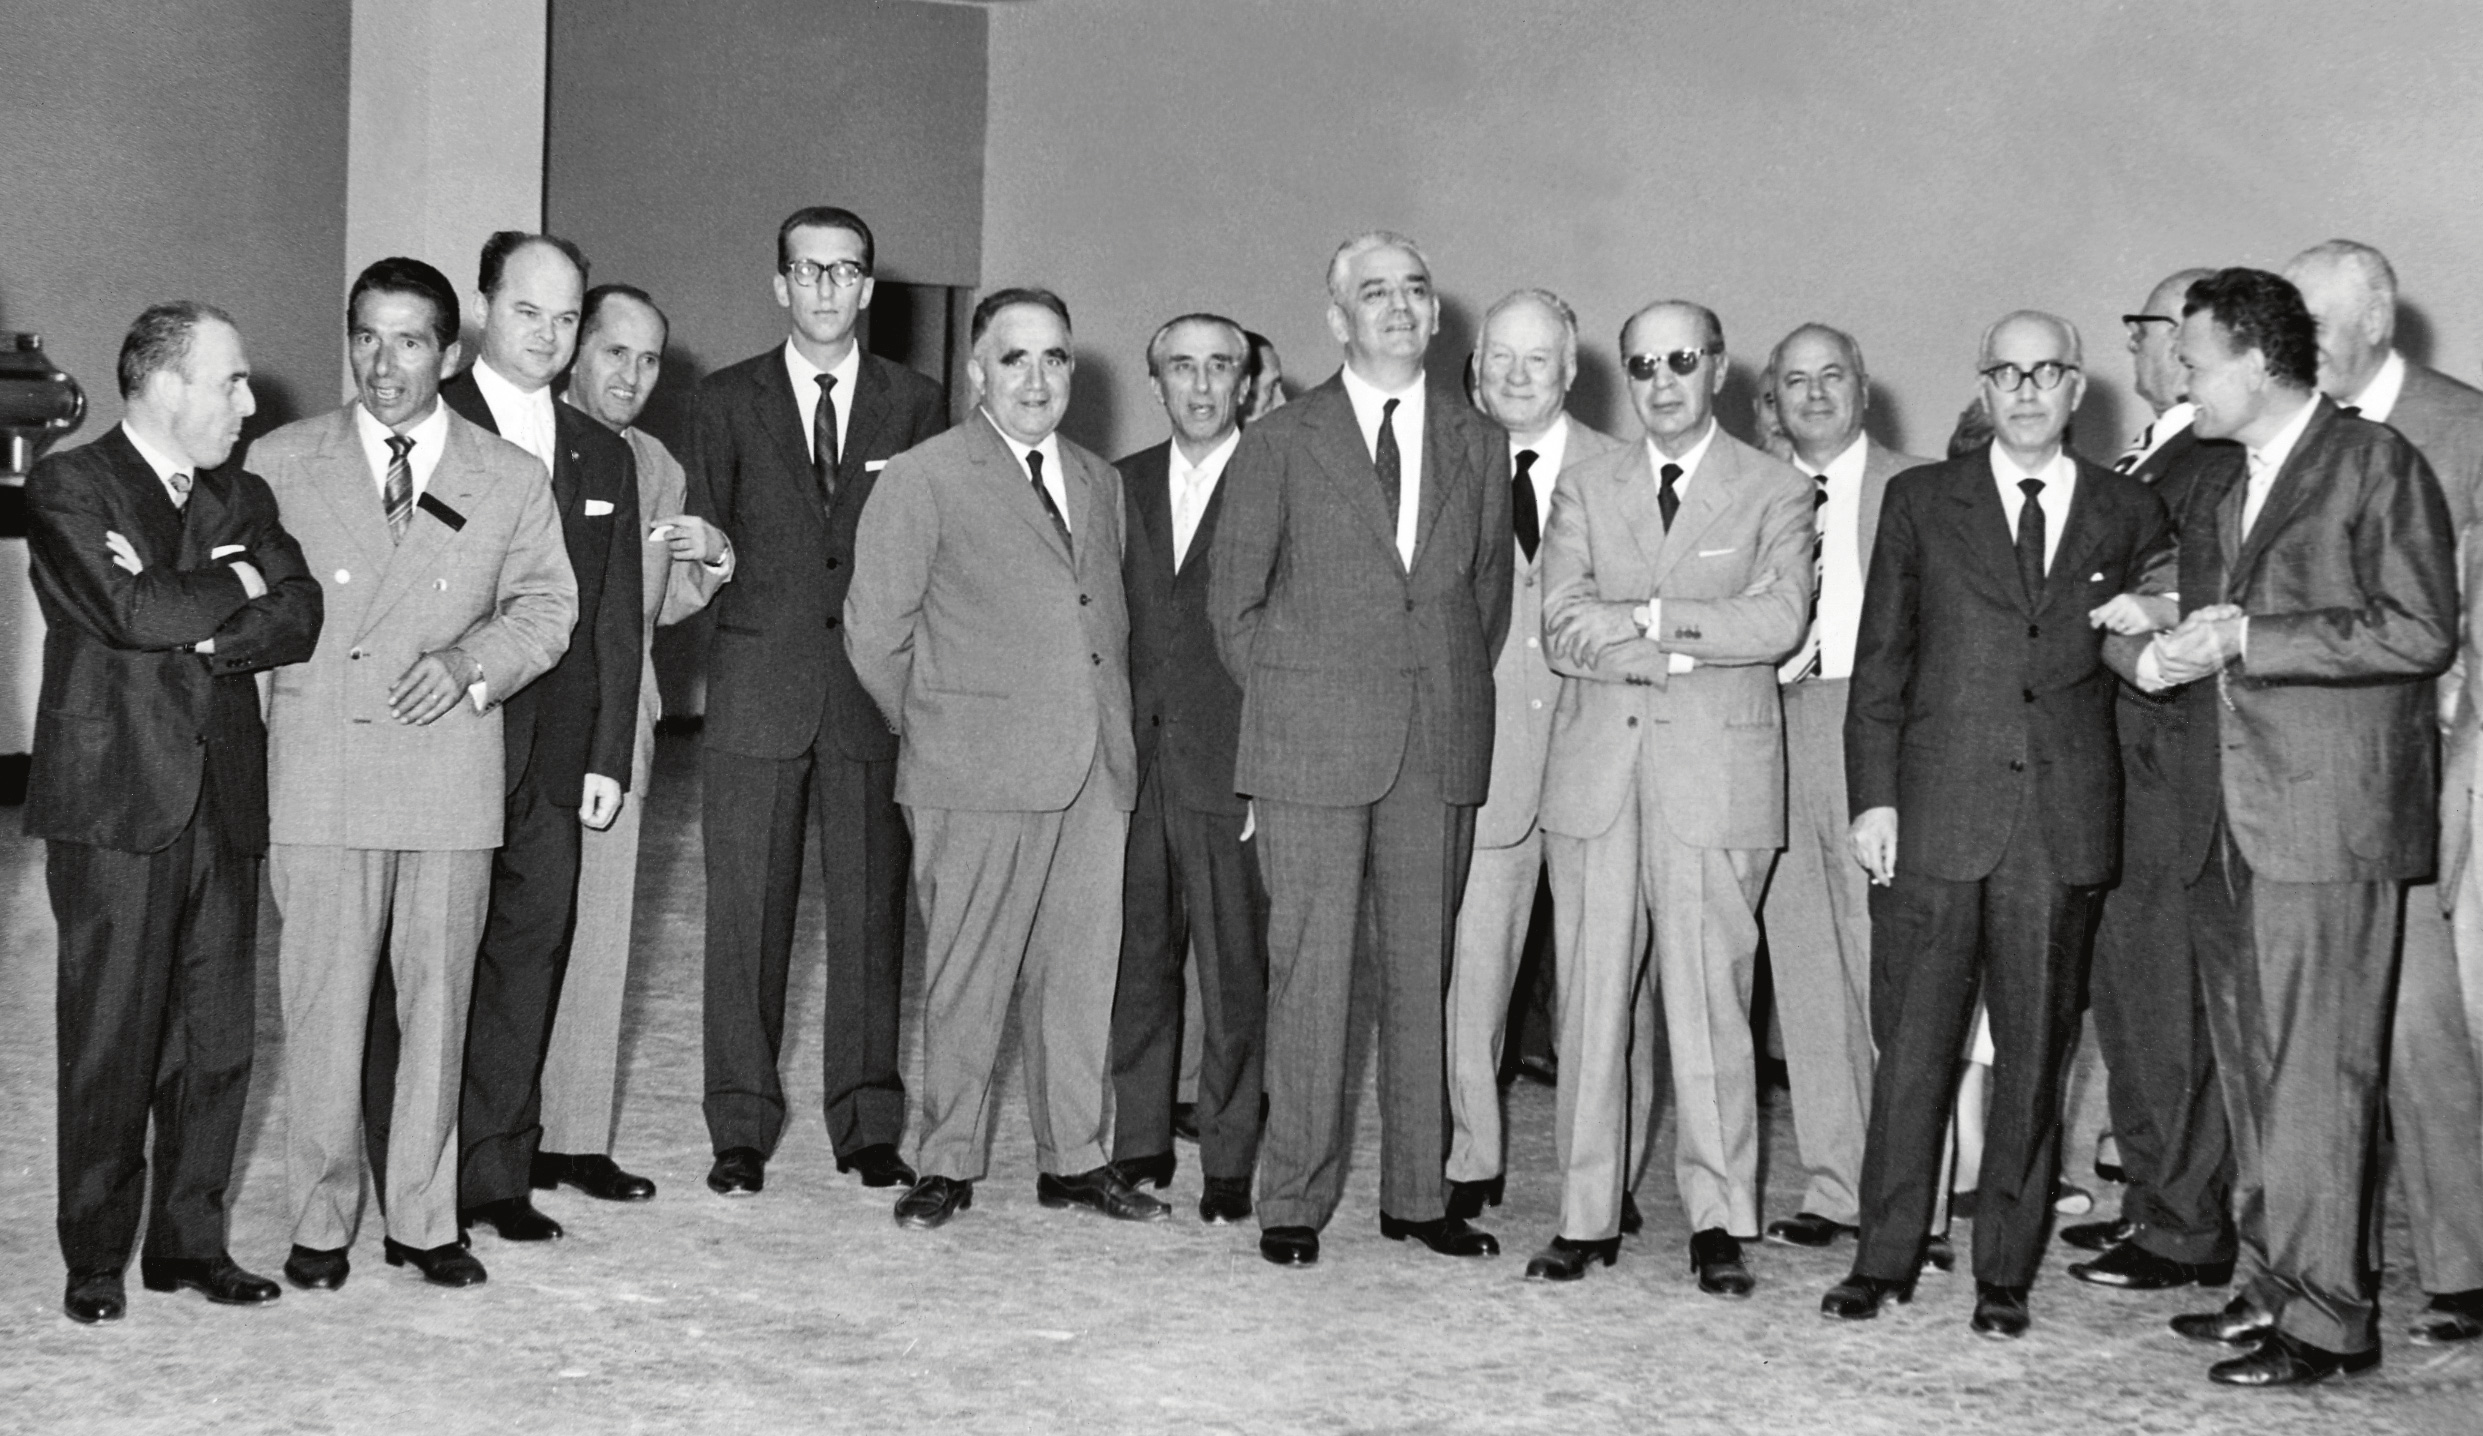 1961. Press conference in occasion of the 1st Salone del Mobile in Milan. Right, foreground: Angelo Molteni